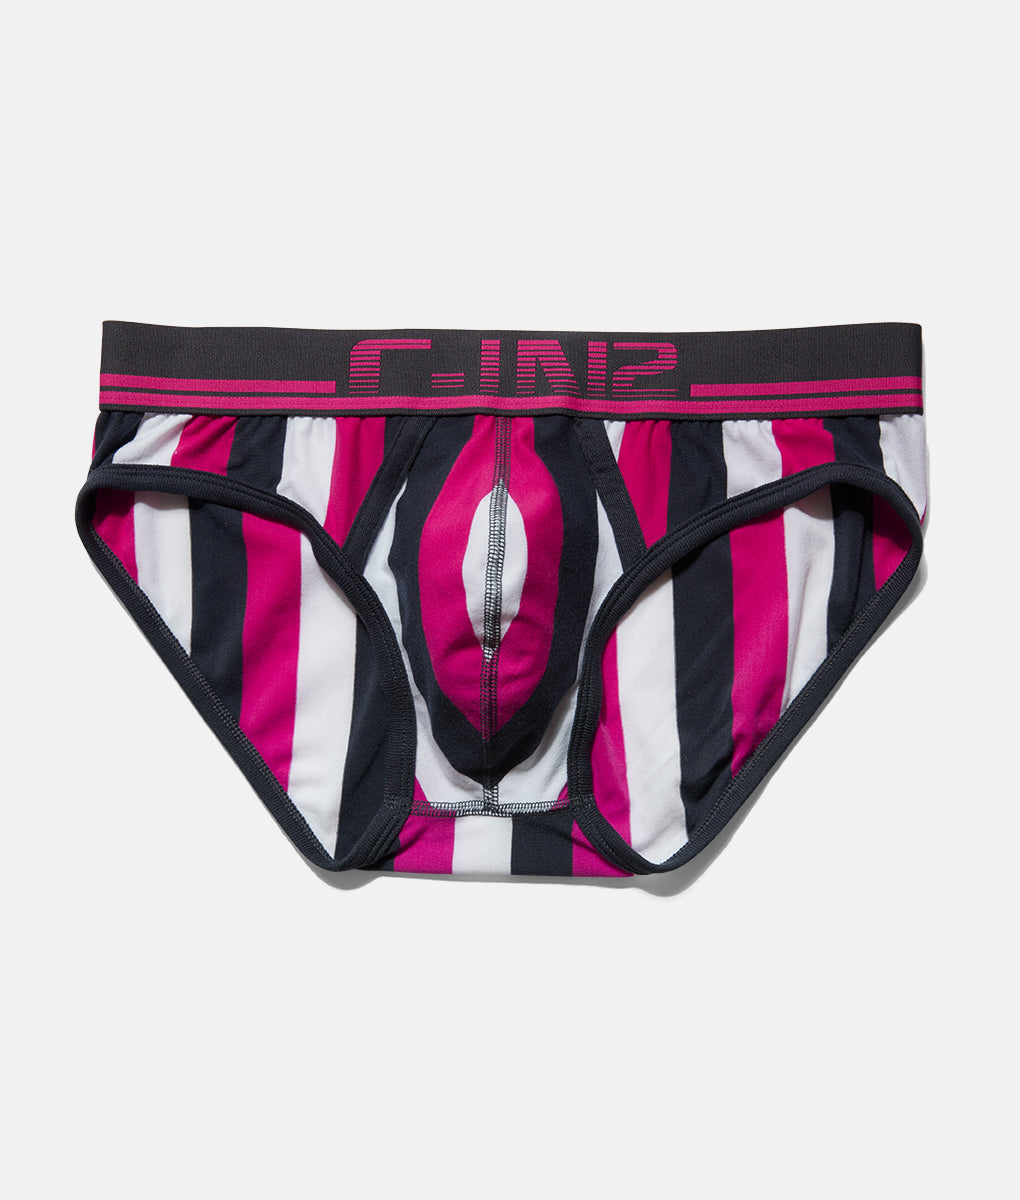 C-IN2 Super Bright Low Rise Brief Palmer Pink 1013-673AS at International  Jock